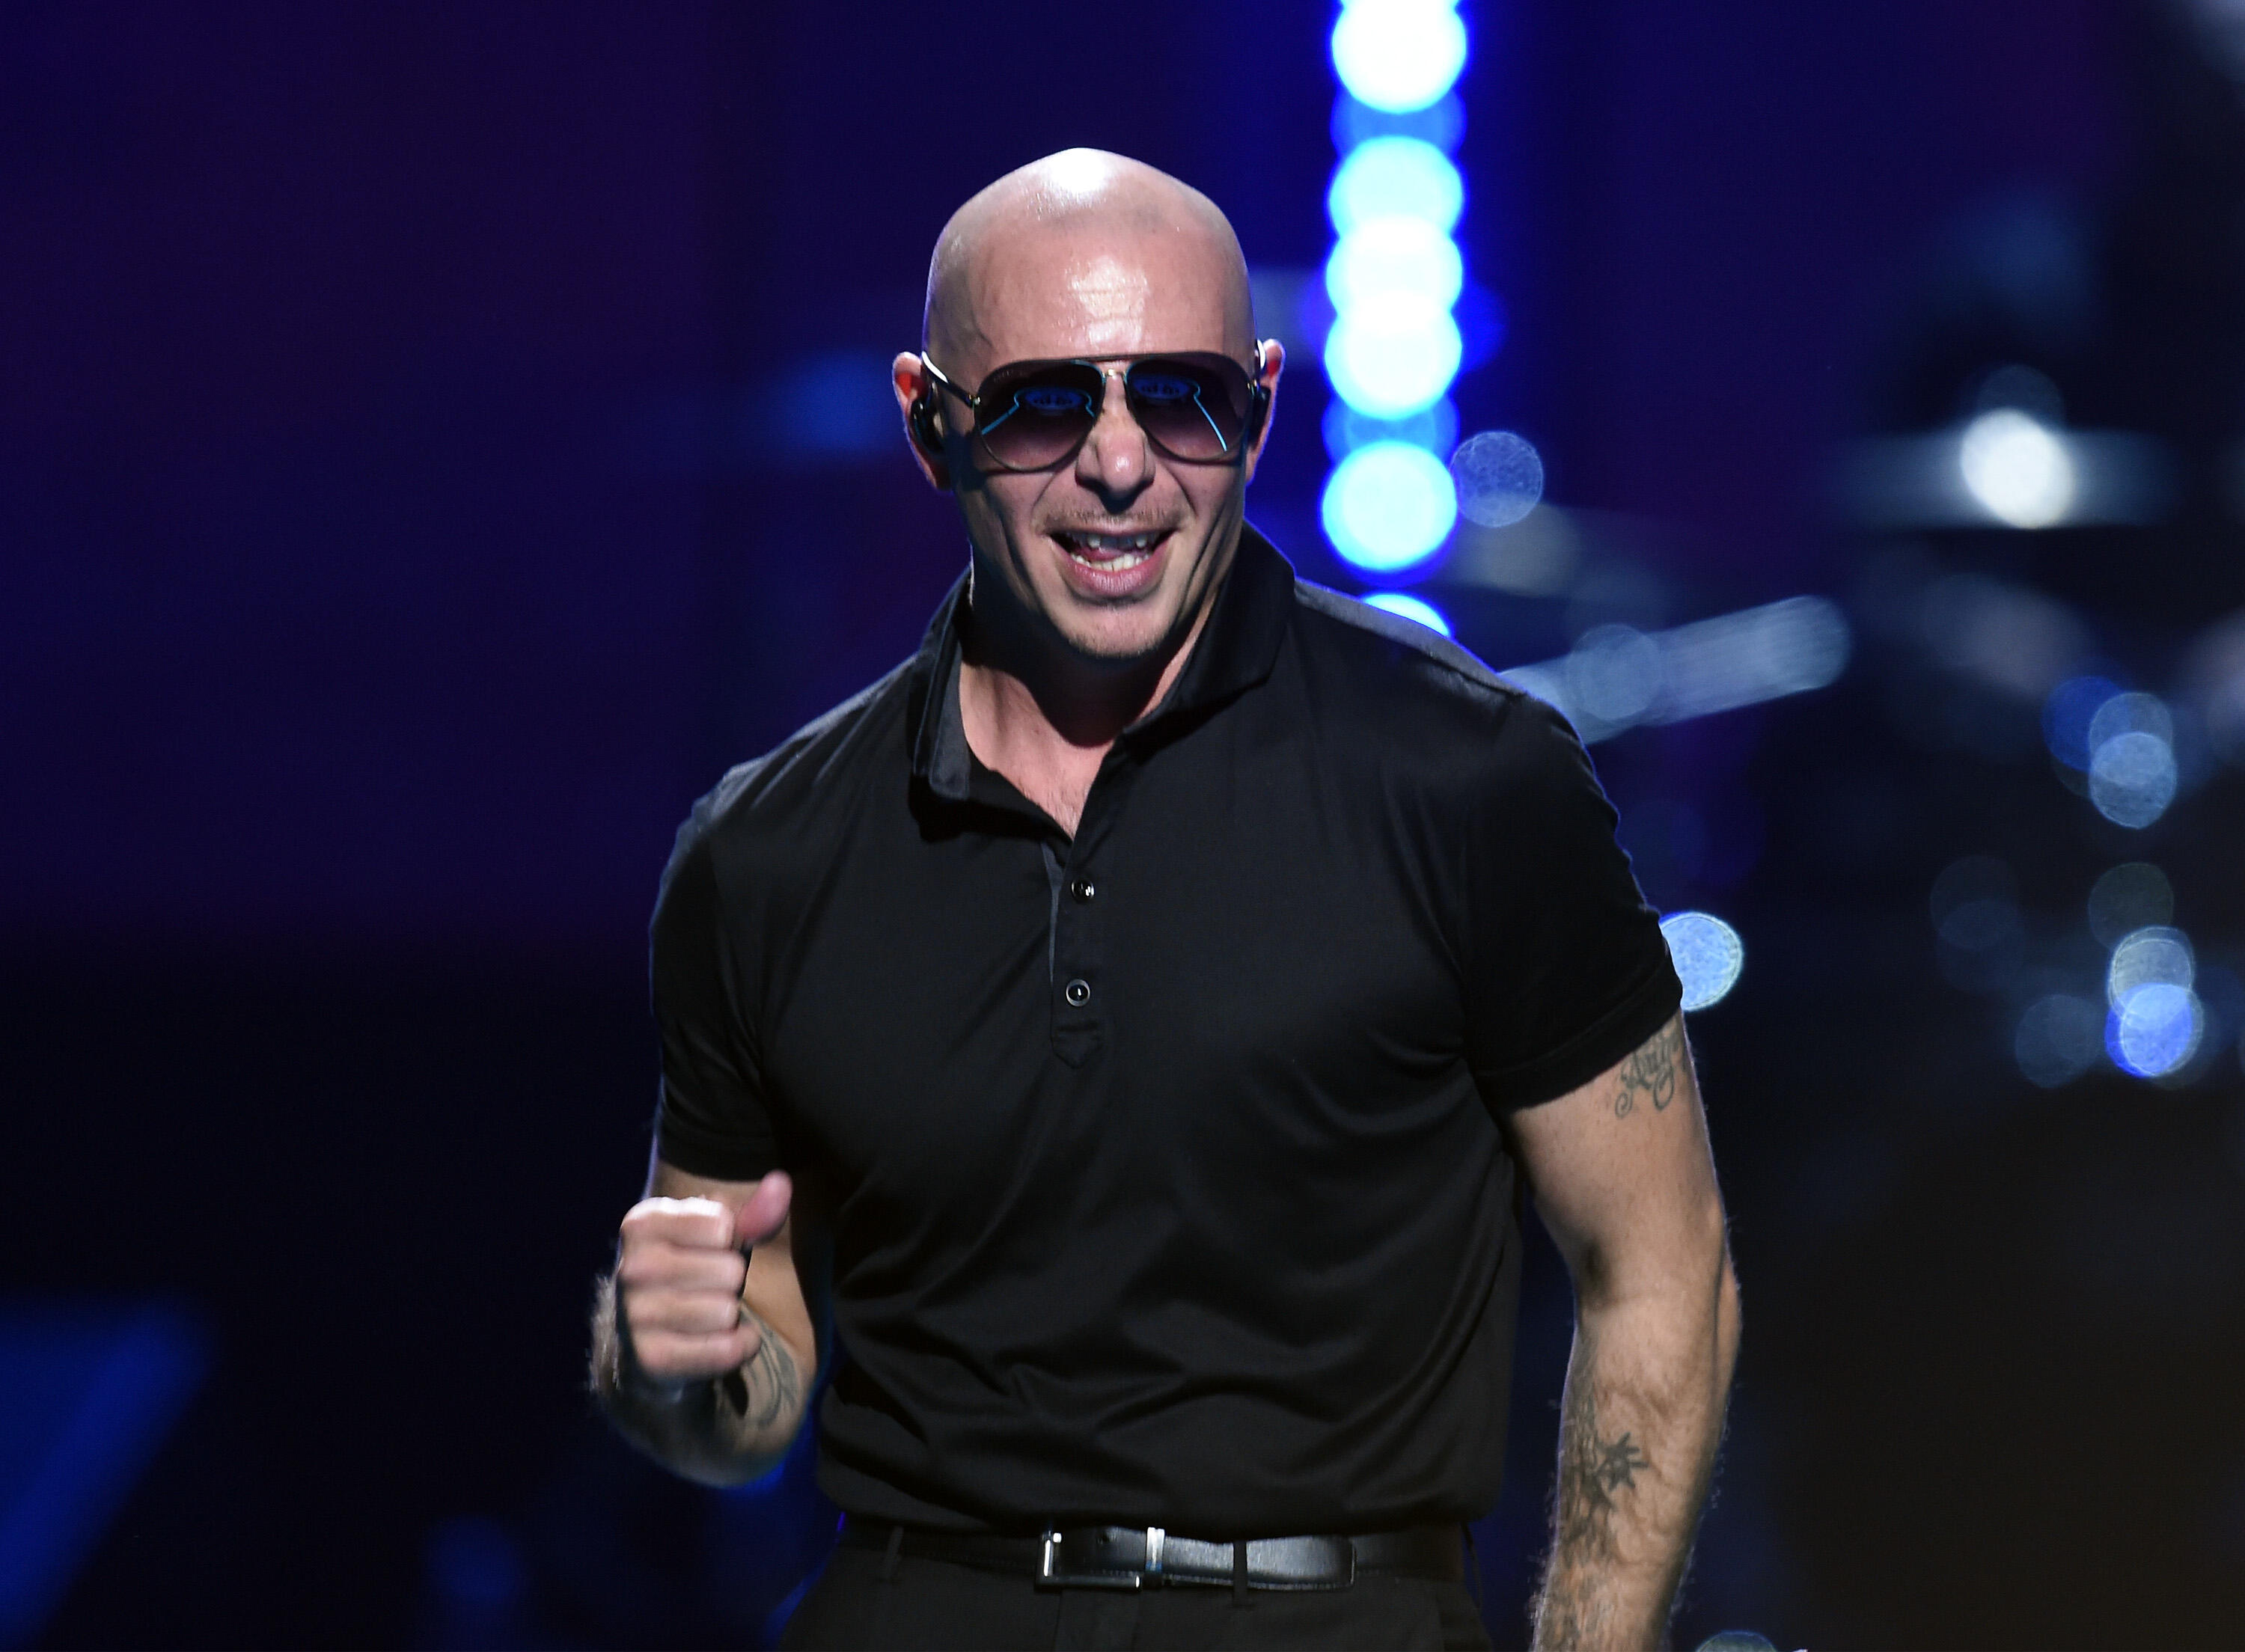 LAS VEGAS, NV - SEPTEMBER 24:  Recording artist Pitbull performs onstage at the 2016 iHeartRadio Music Festival at T-Mobile Arena on September 24, 2016 in Las Vegas, Nevada.  (Photo by Kevin Winter/Getty Images)